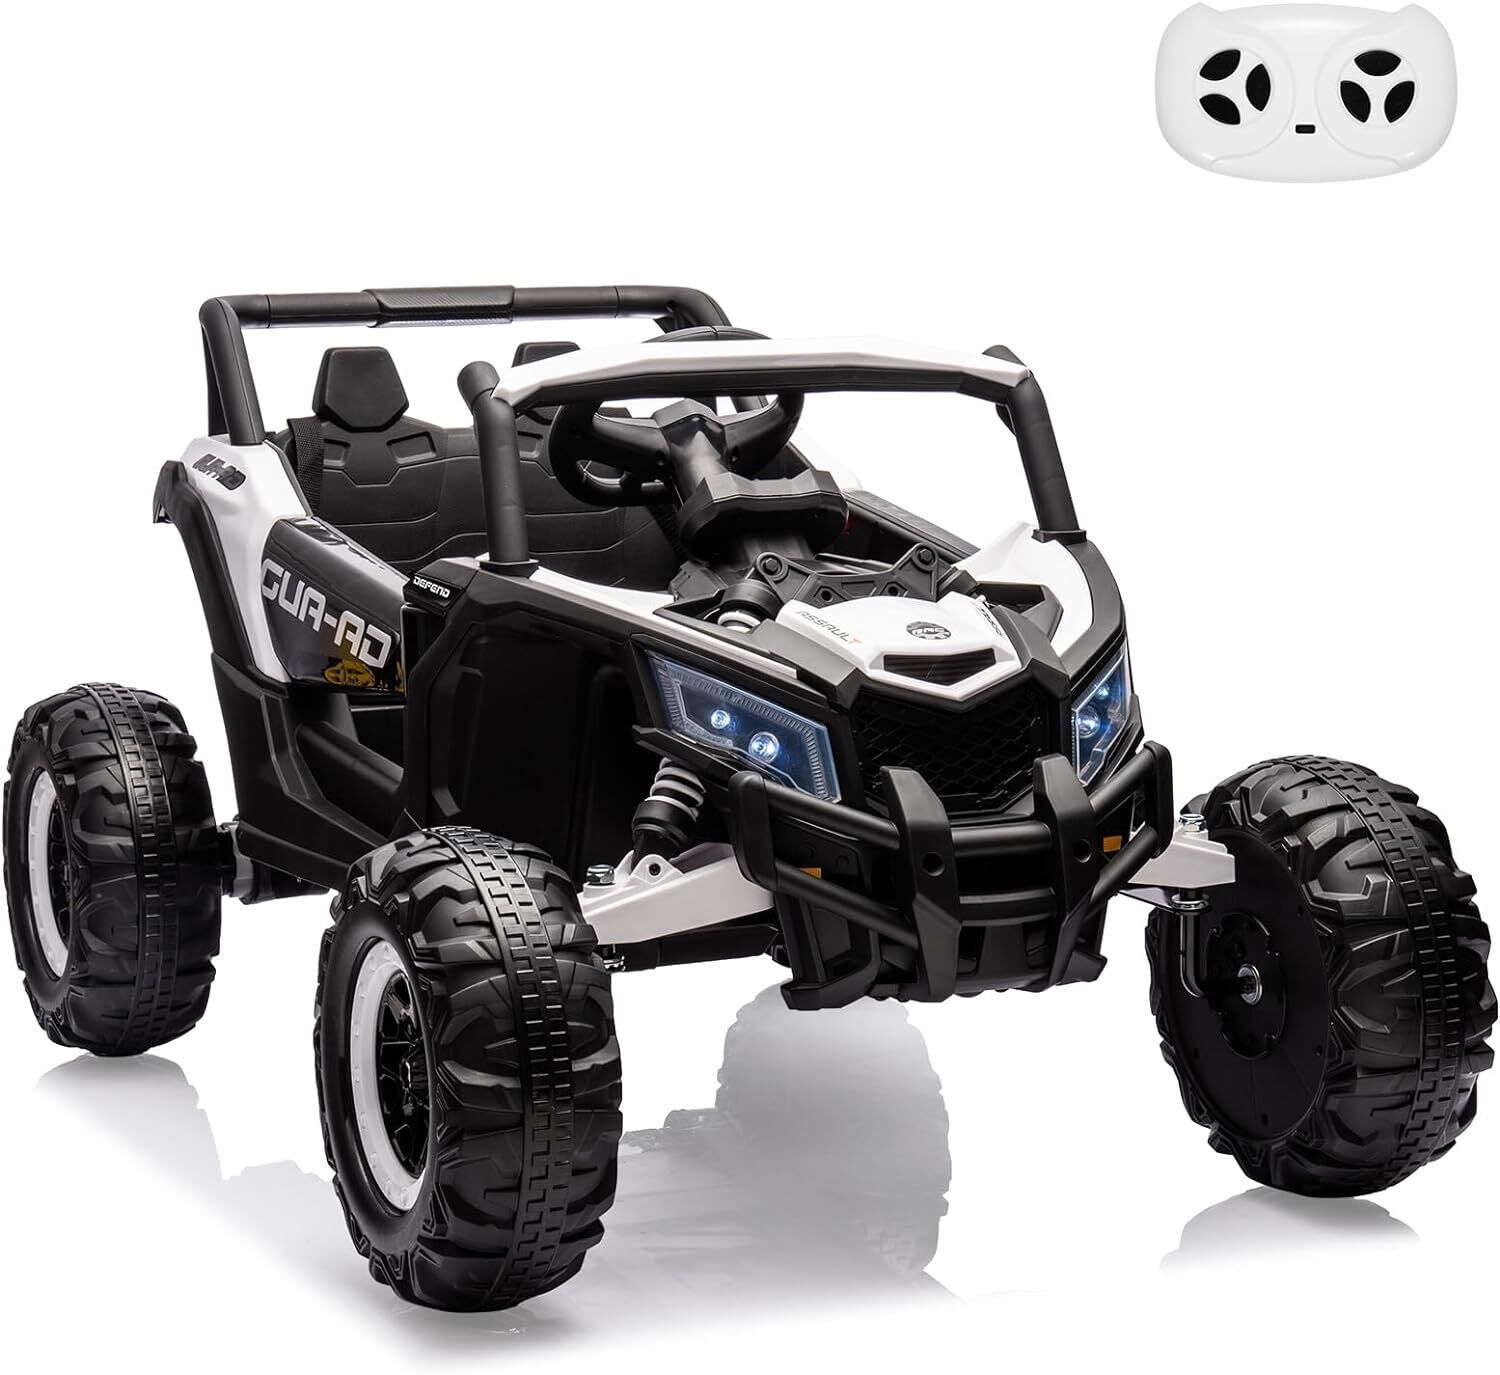 24V Power Wheels Gifts for Kids Ride on UTV Car Remote Control Toys Electric